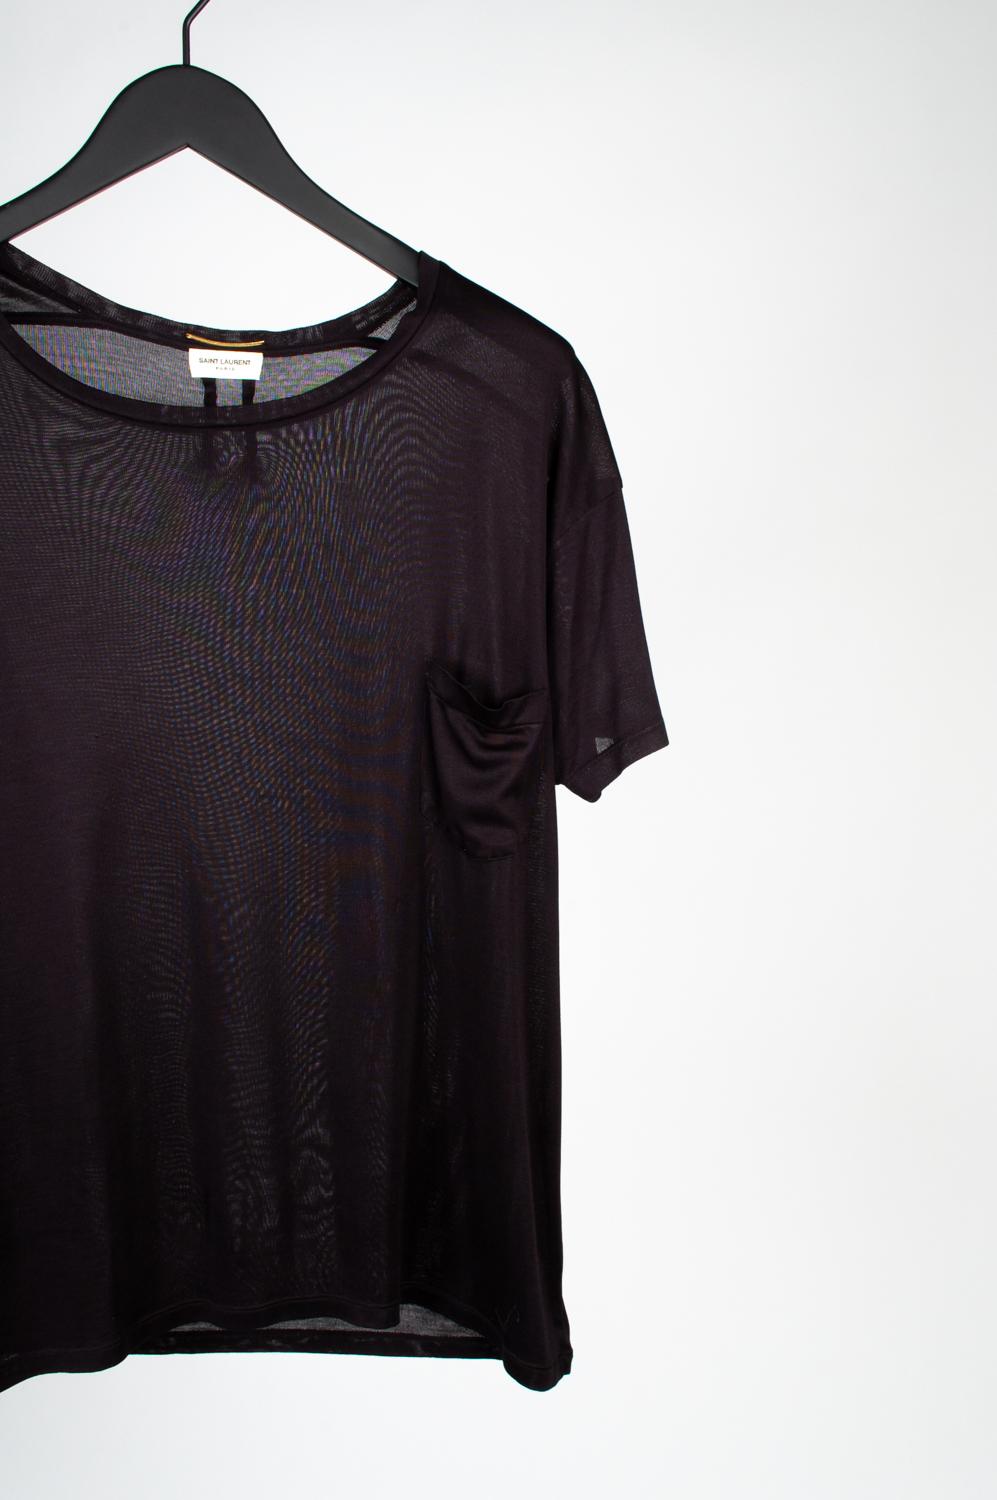 100% genuine Saint Laurent crew neck thin summer t shirt 
Color: black
(An actual color may a bit vary due to individual computer screen interpretation)
Material: unknow missing care label
Tag size: Medium
This jumper is great quality item. Rate 9